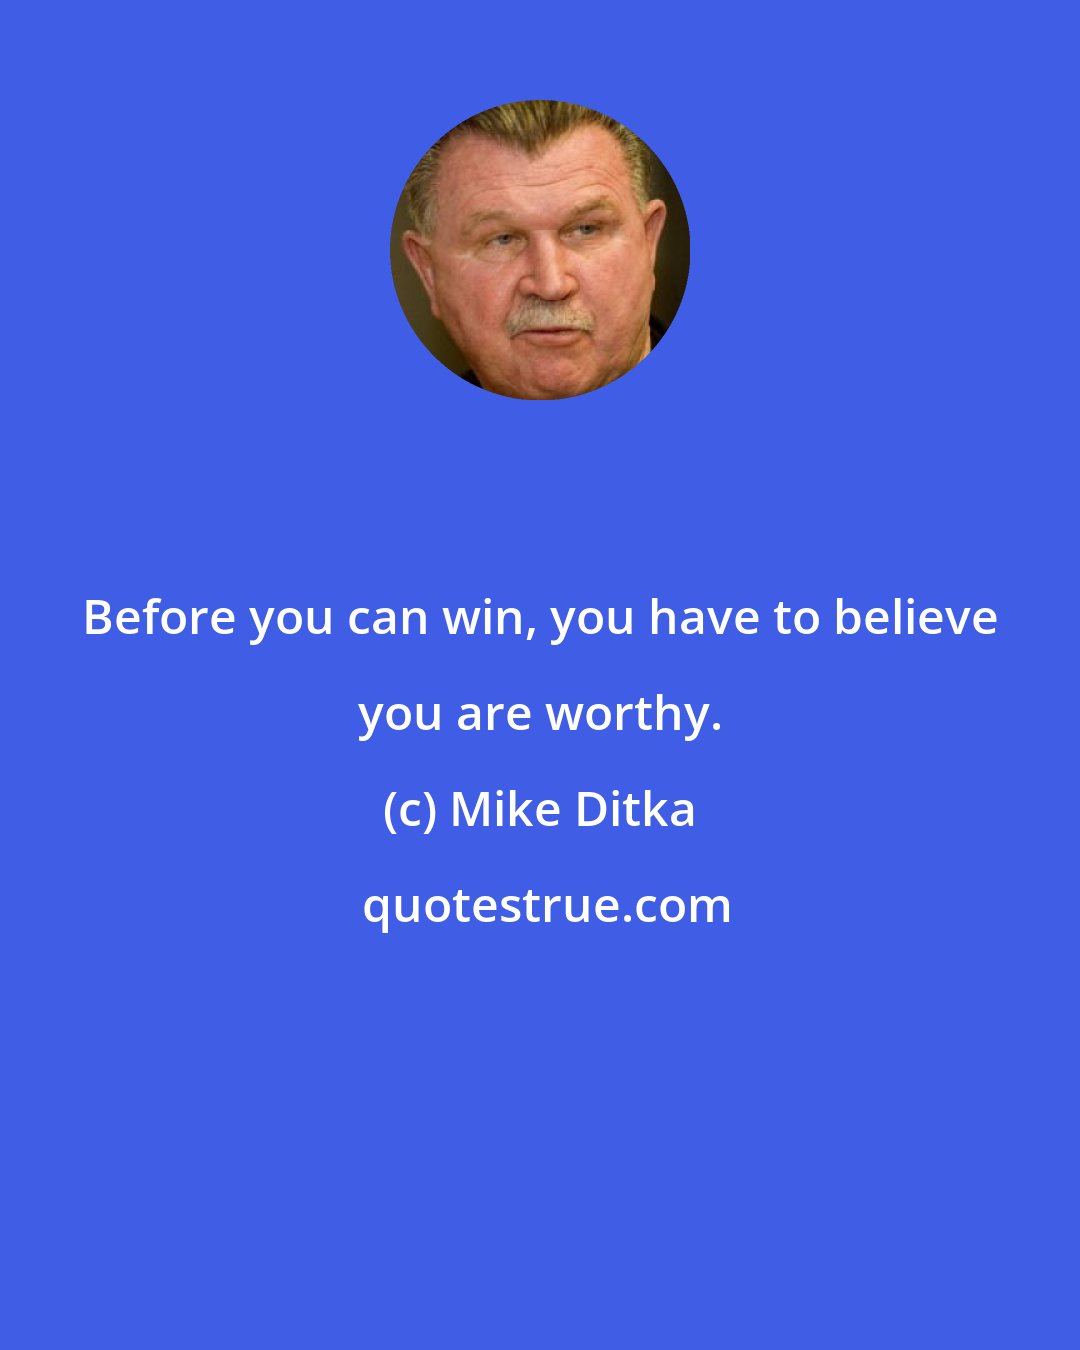 Mike Ditka: Before you can win, you have to believe you are worthy.